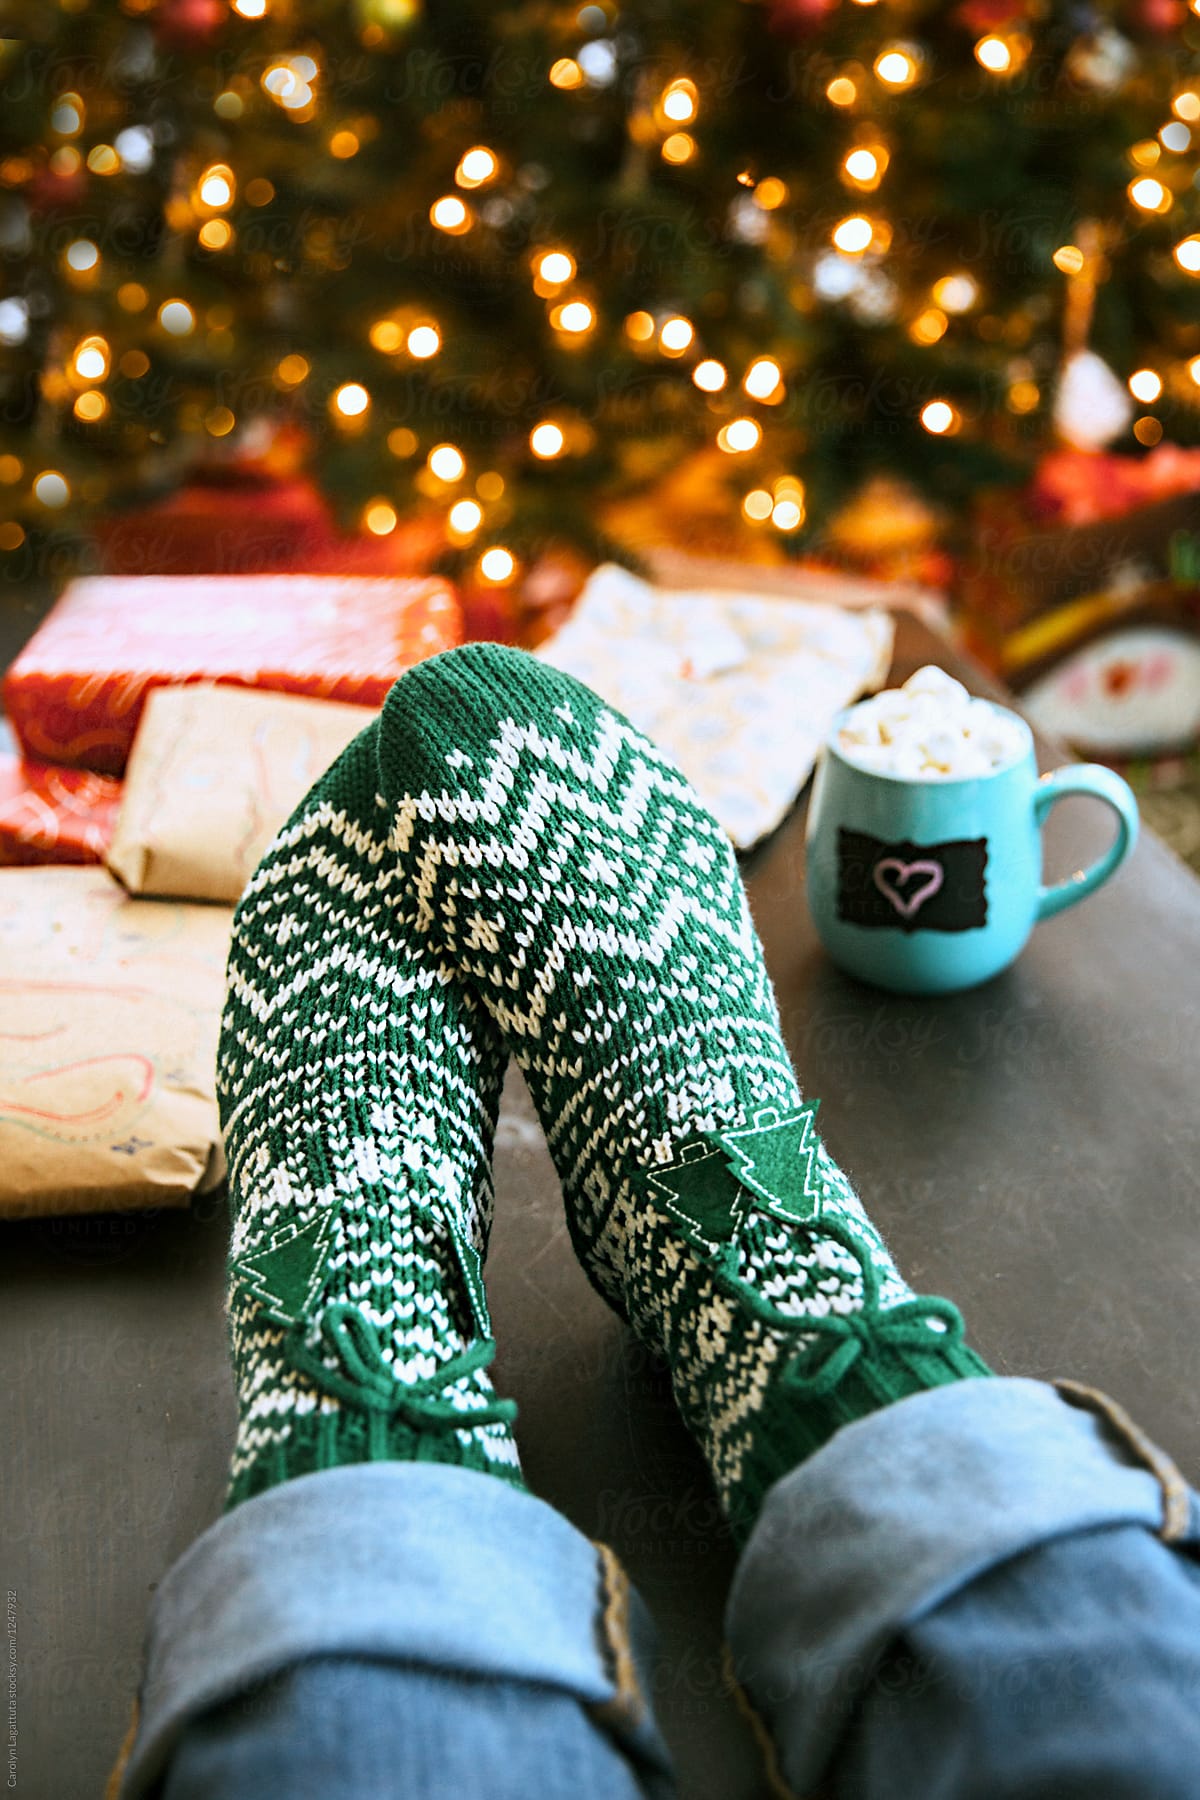 Feet with Christmas socks in front of the tree and wrapped presents